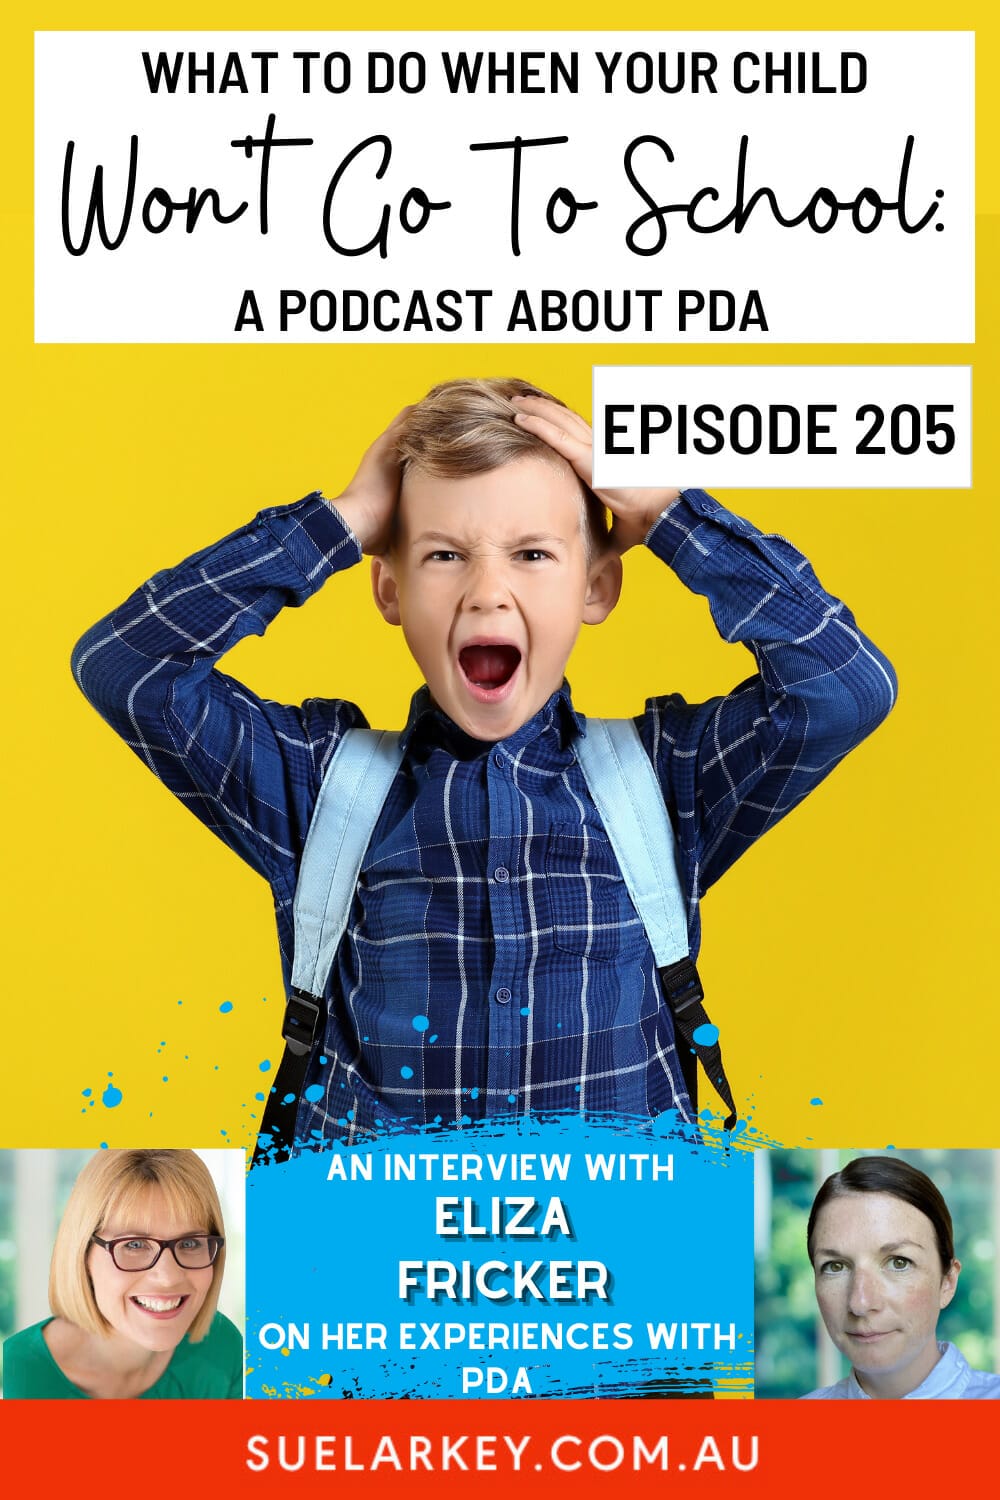 Learning about PDA with Autism with Sue Larkey interviewing author with a Lived Experience